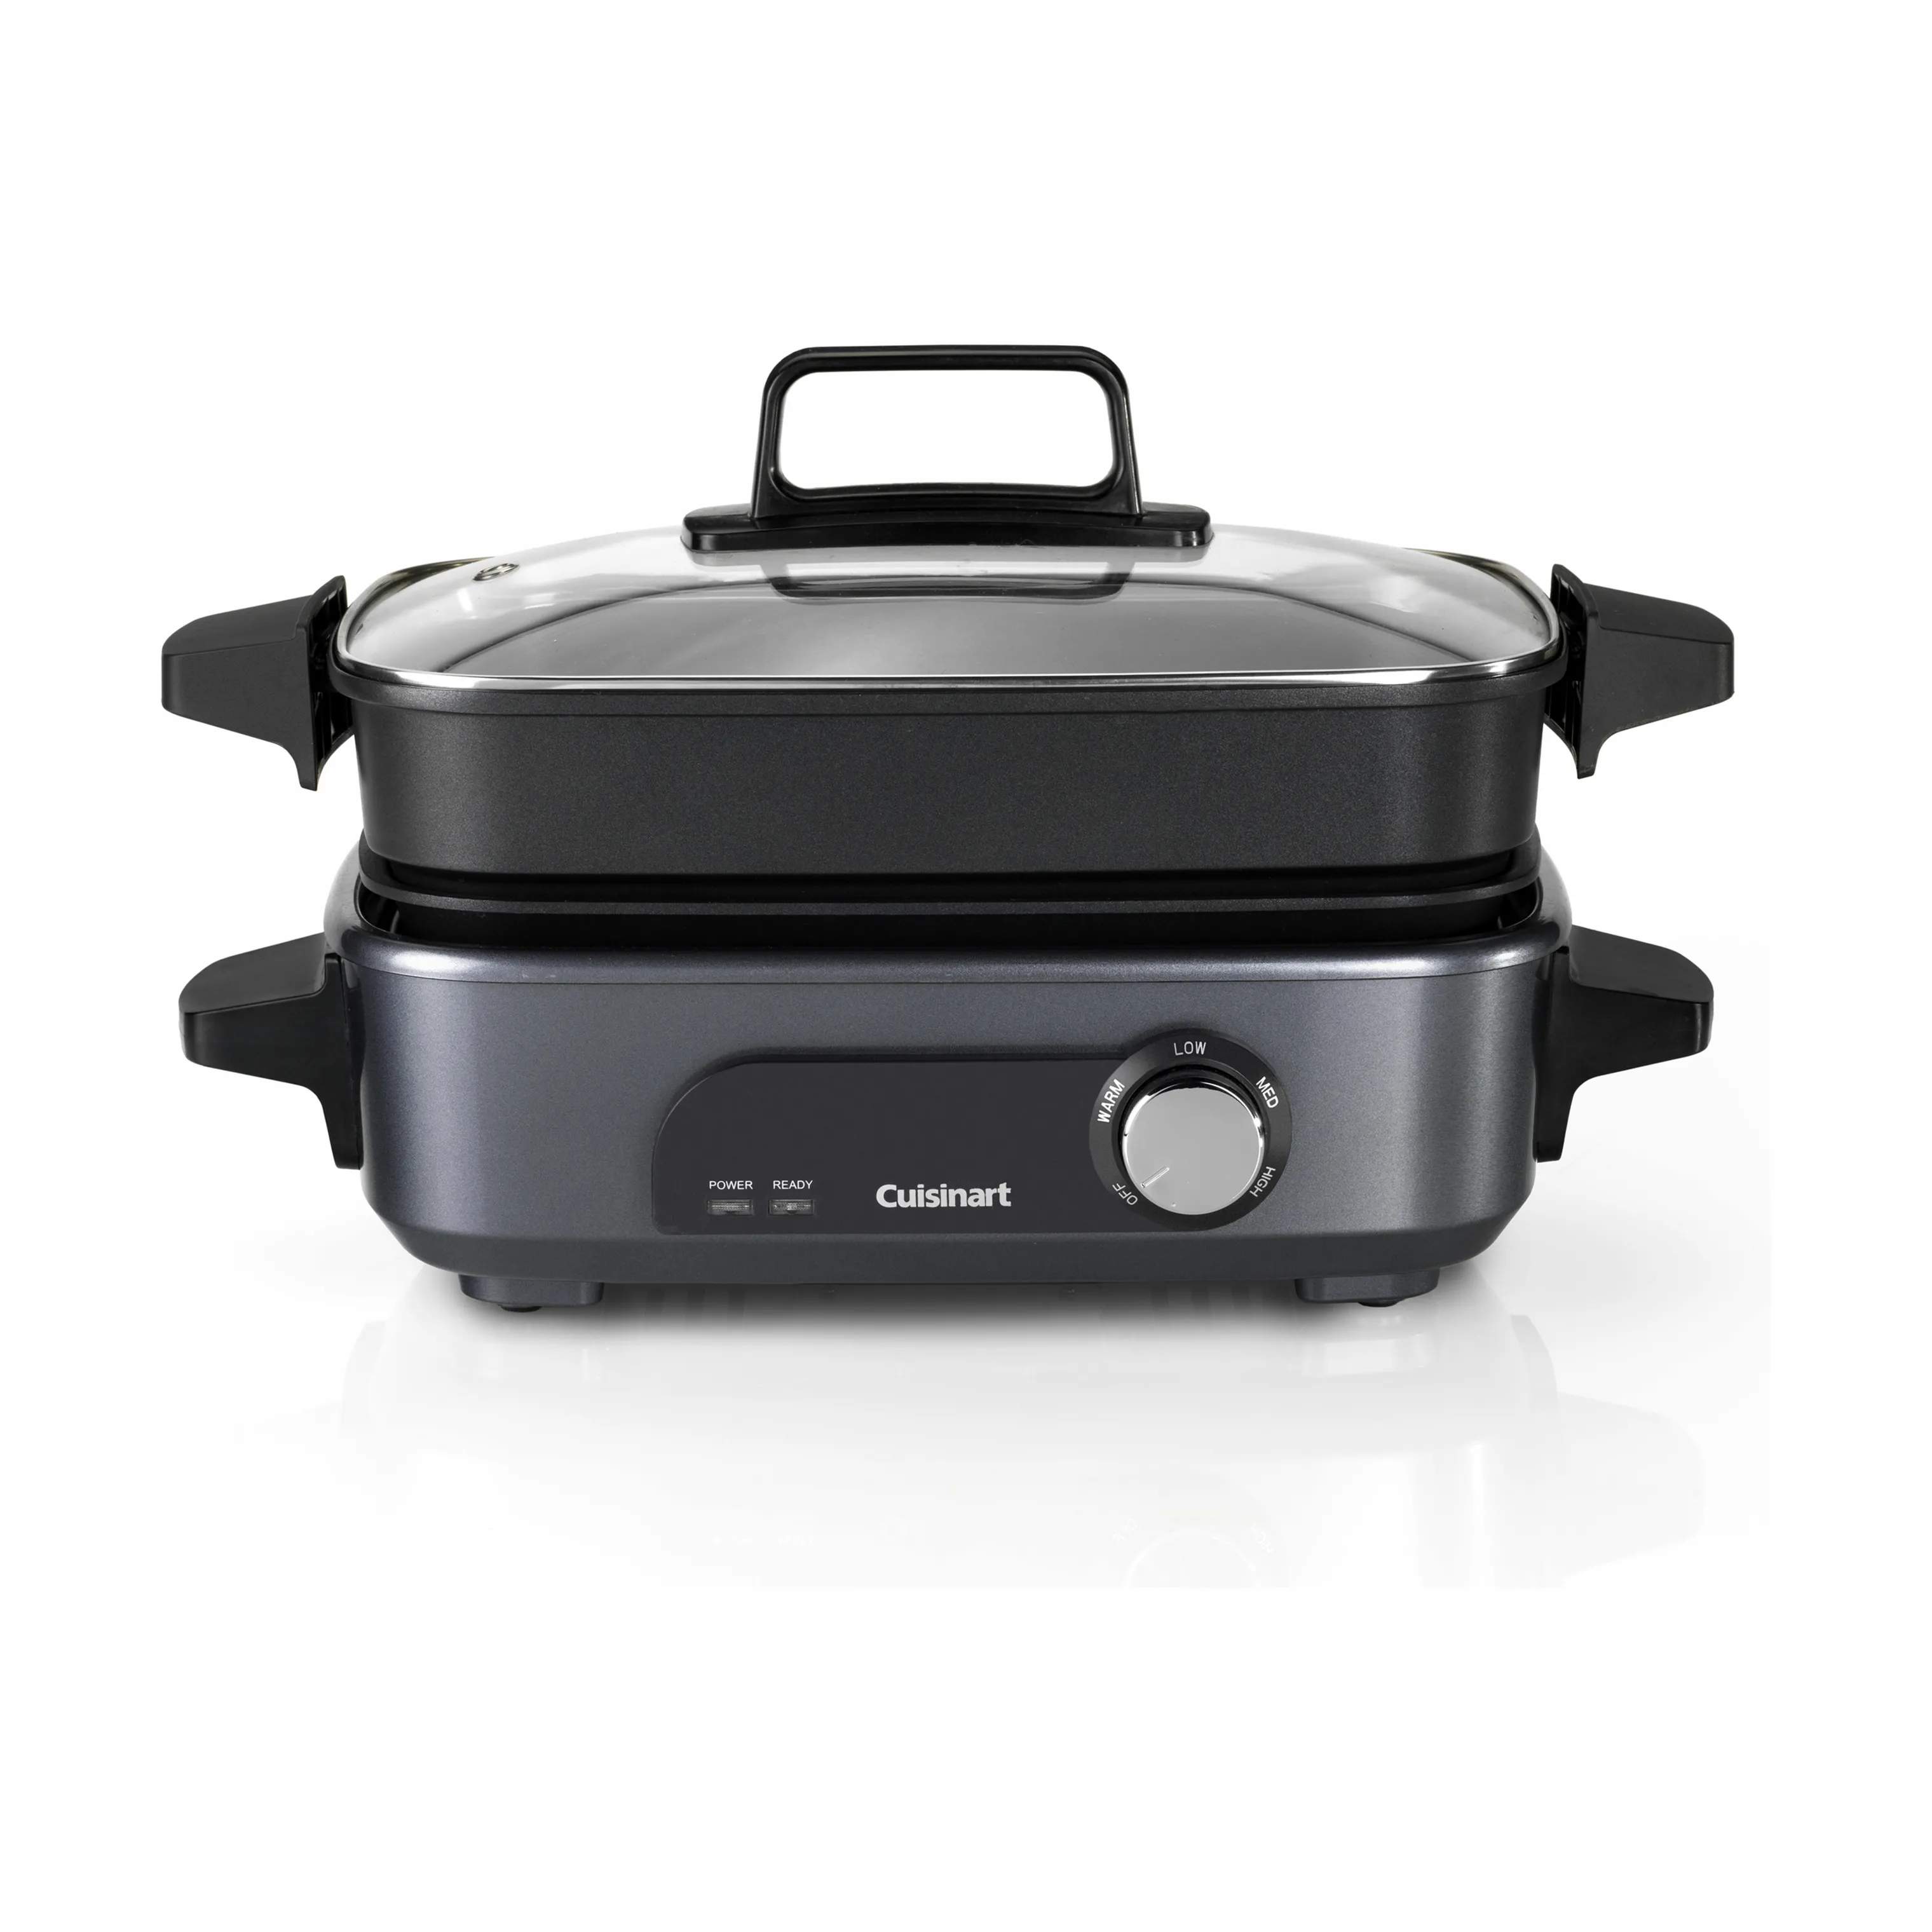 Cooking Grill Steam Sear Multicooker